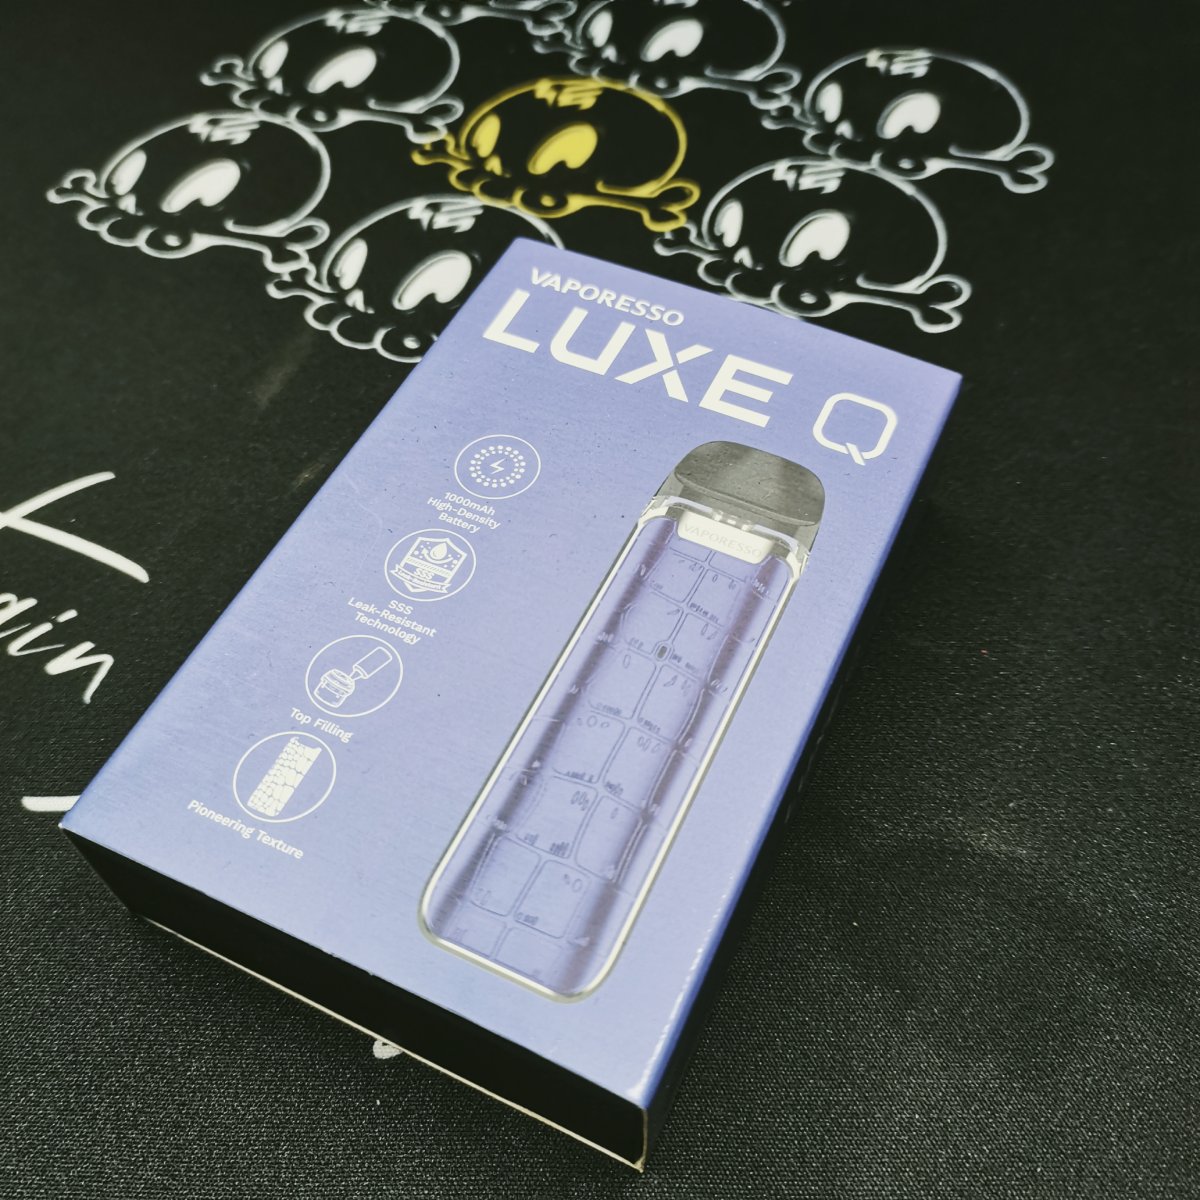 Vaporesso LUXE Q review 